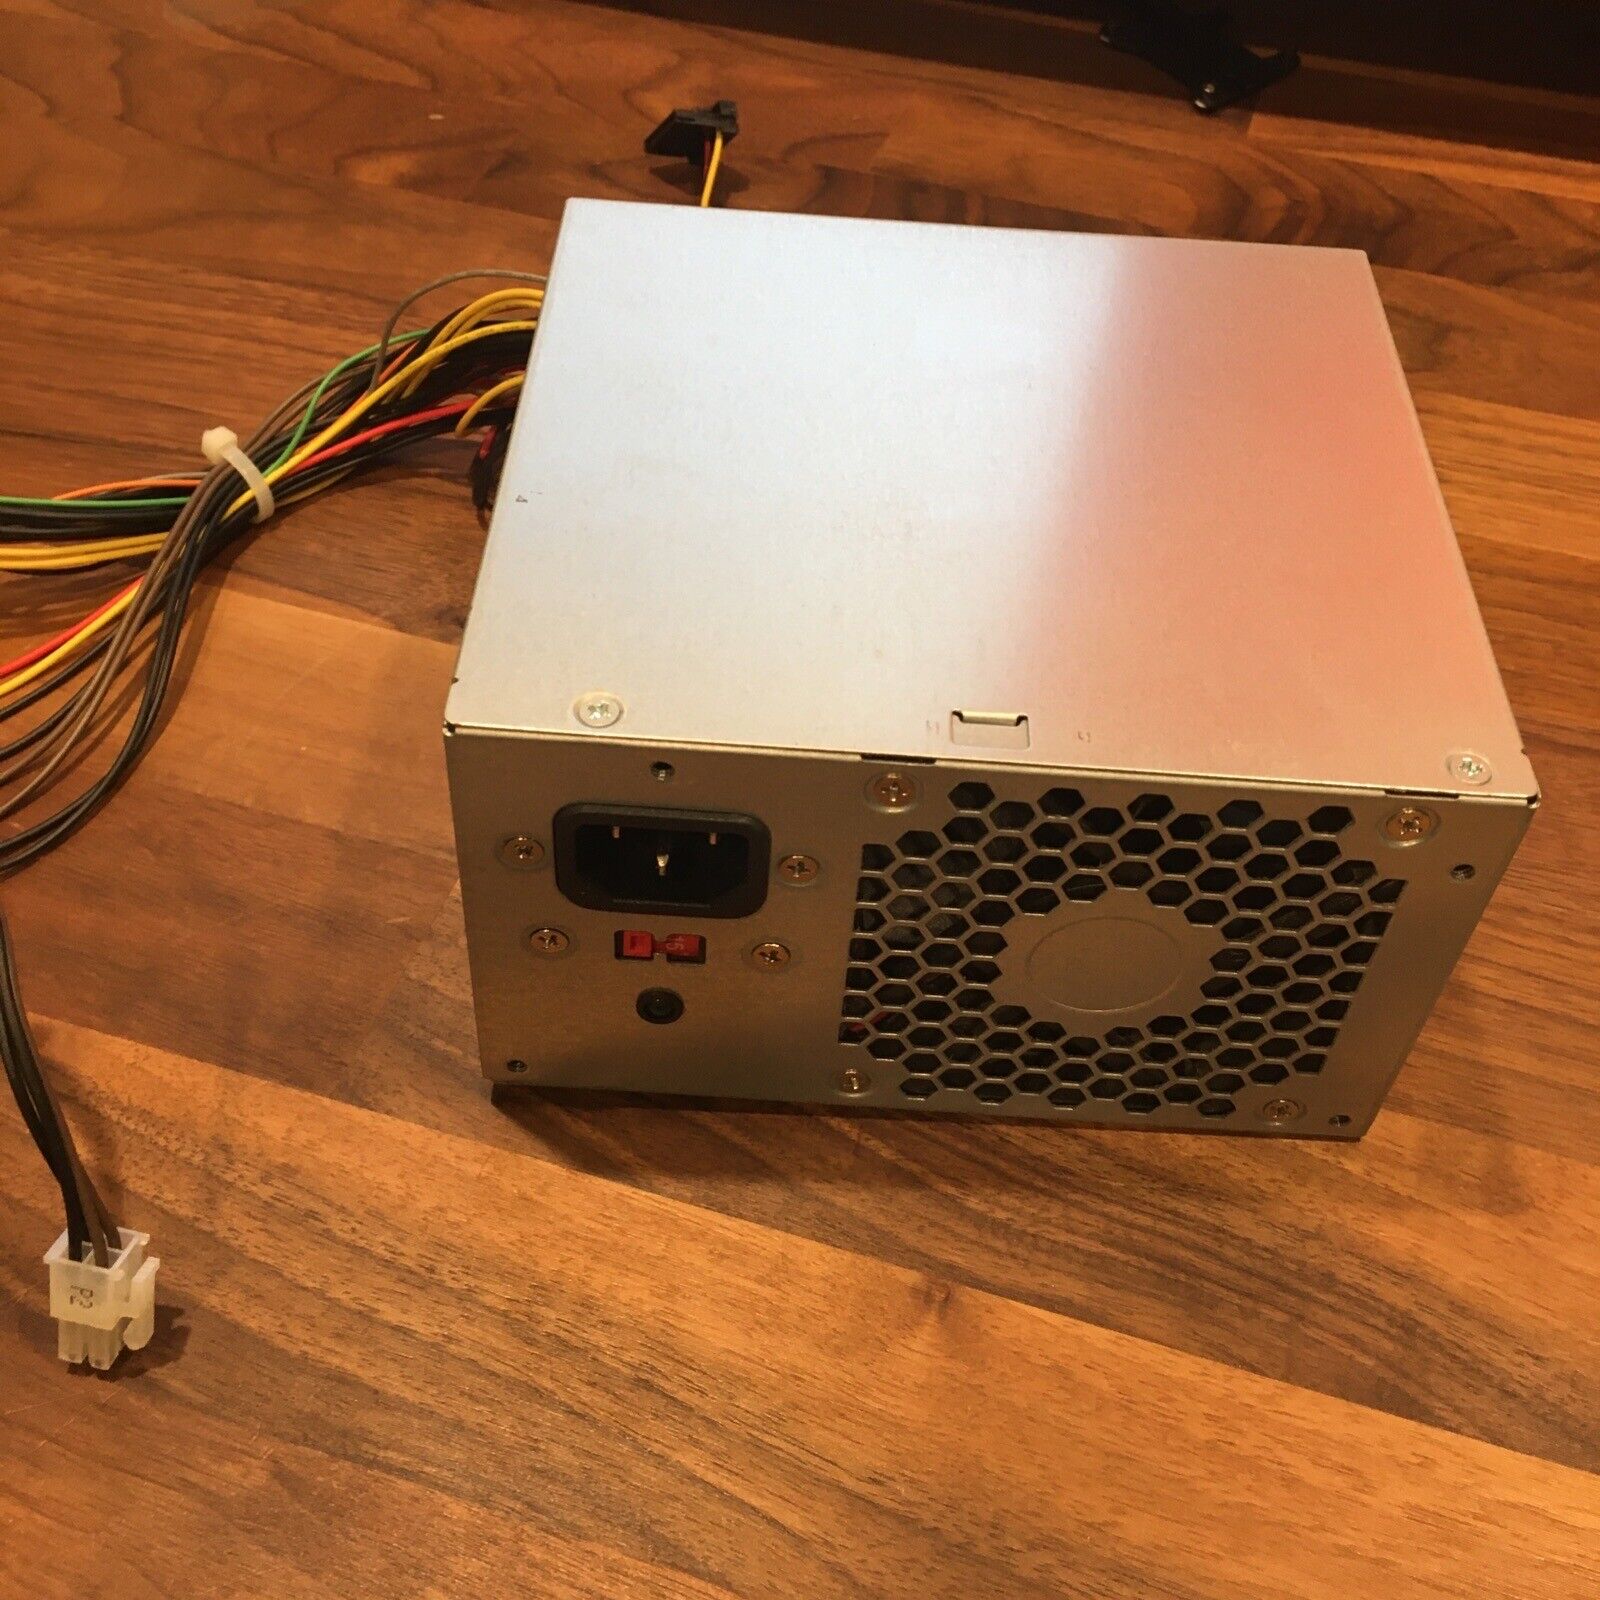 300 Watt Power Supply PS-5301-02 Tested And Working